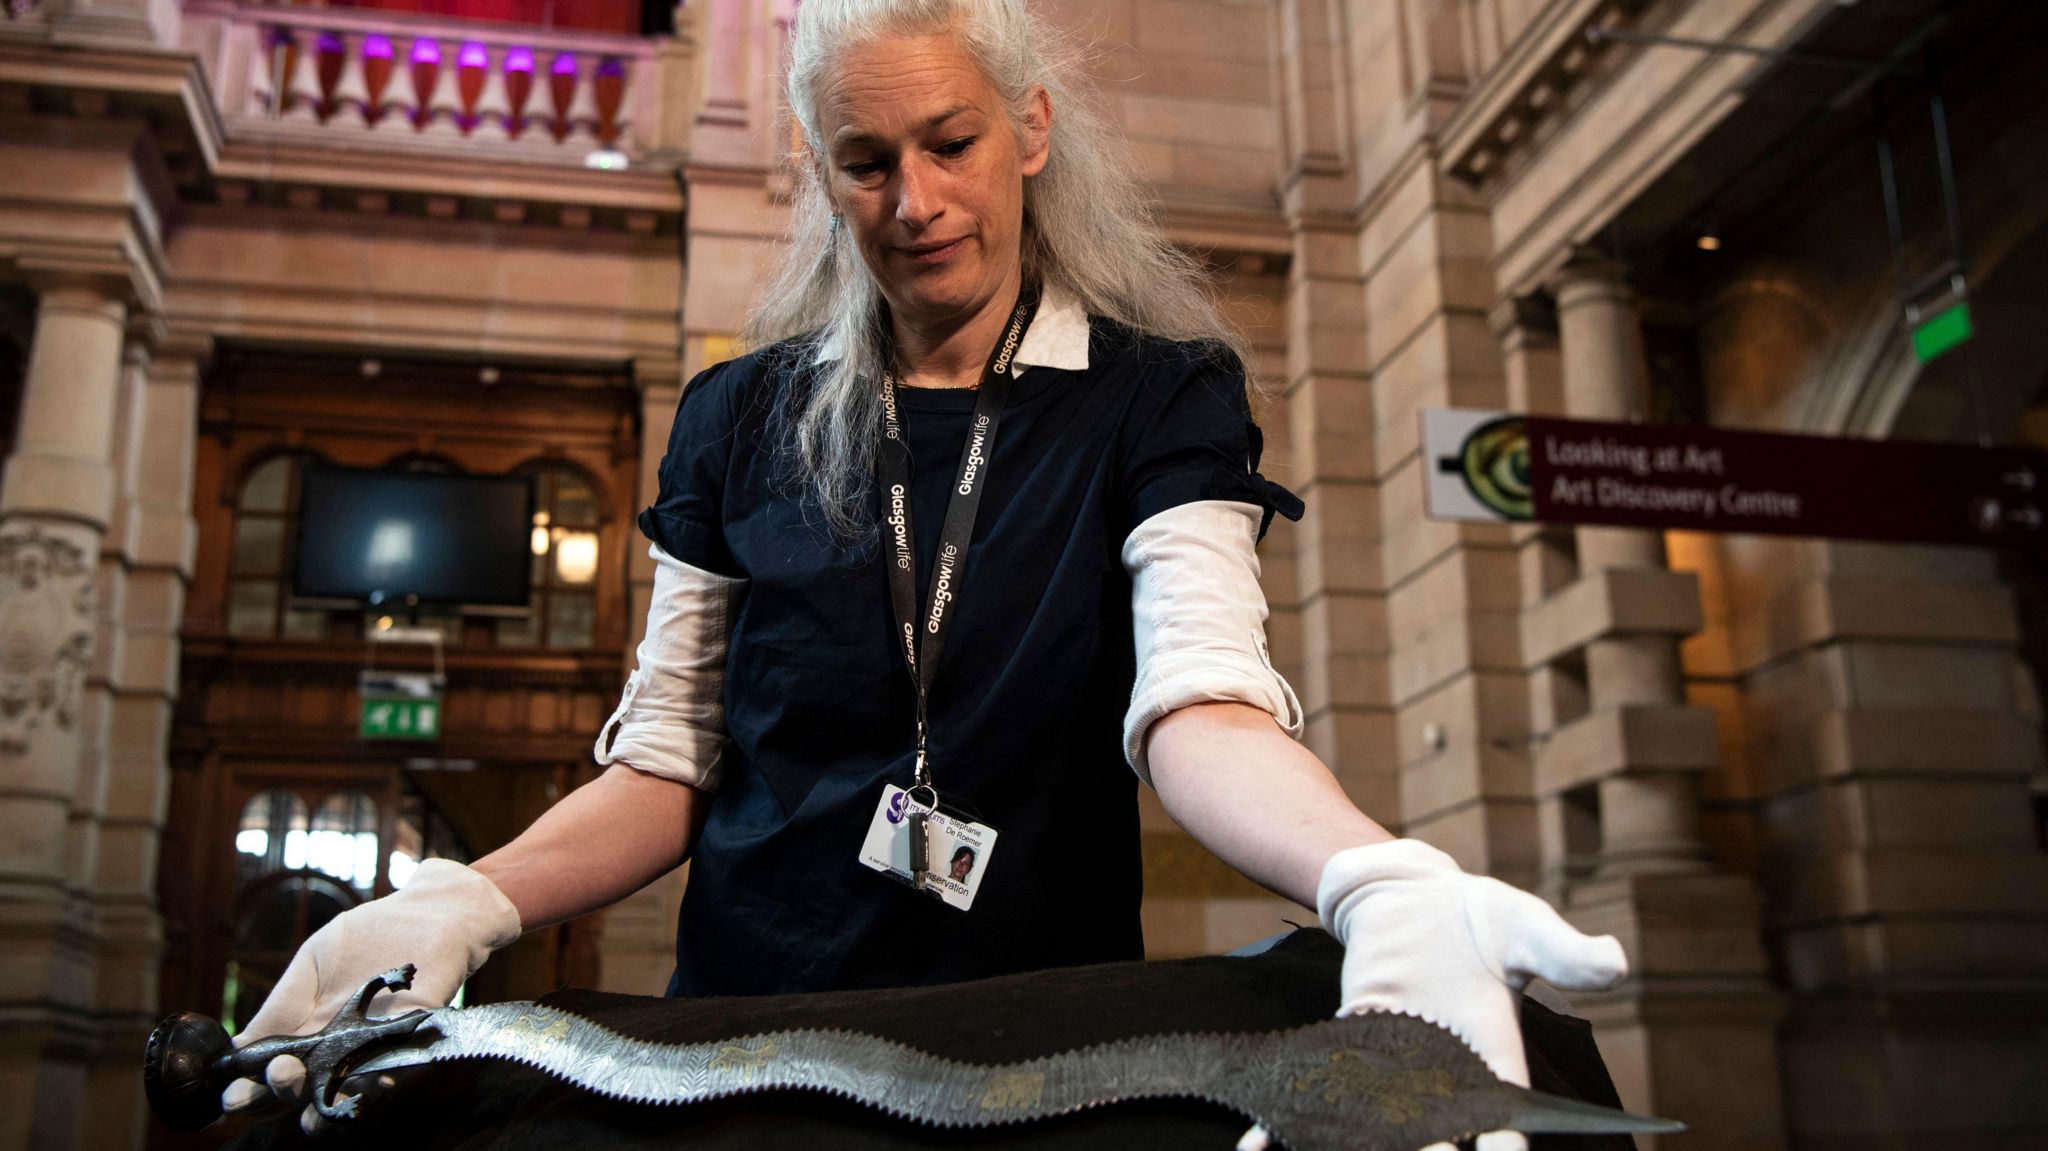 Museum conservator Stephanie De Roemer holds a ceremonial Indo-Persian sword during a transfer of ownership ceremony at Kelvingrove Art Gallery and Museum